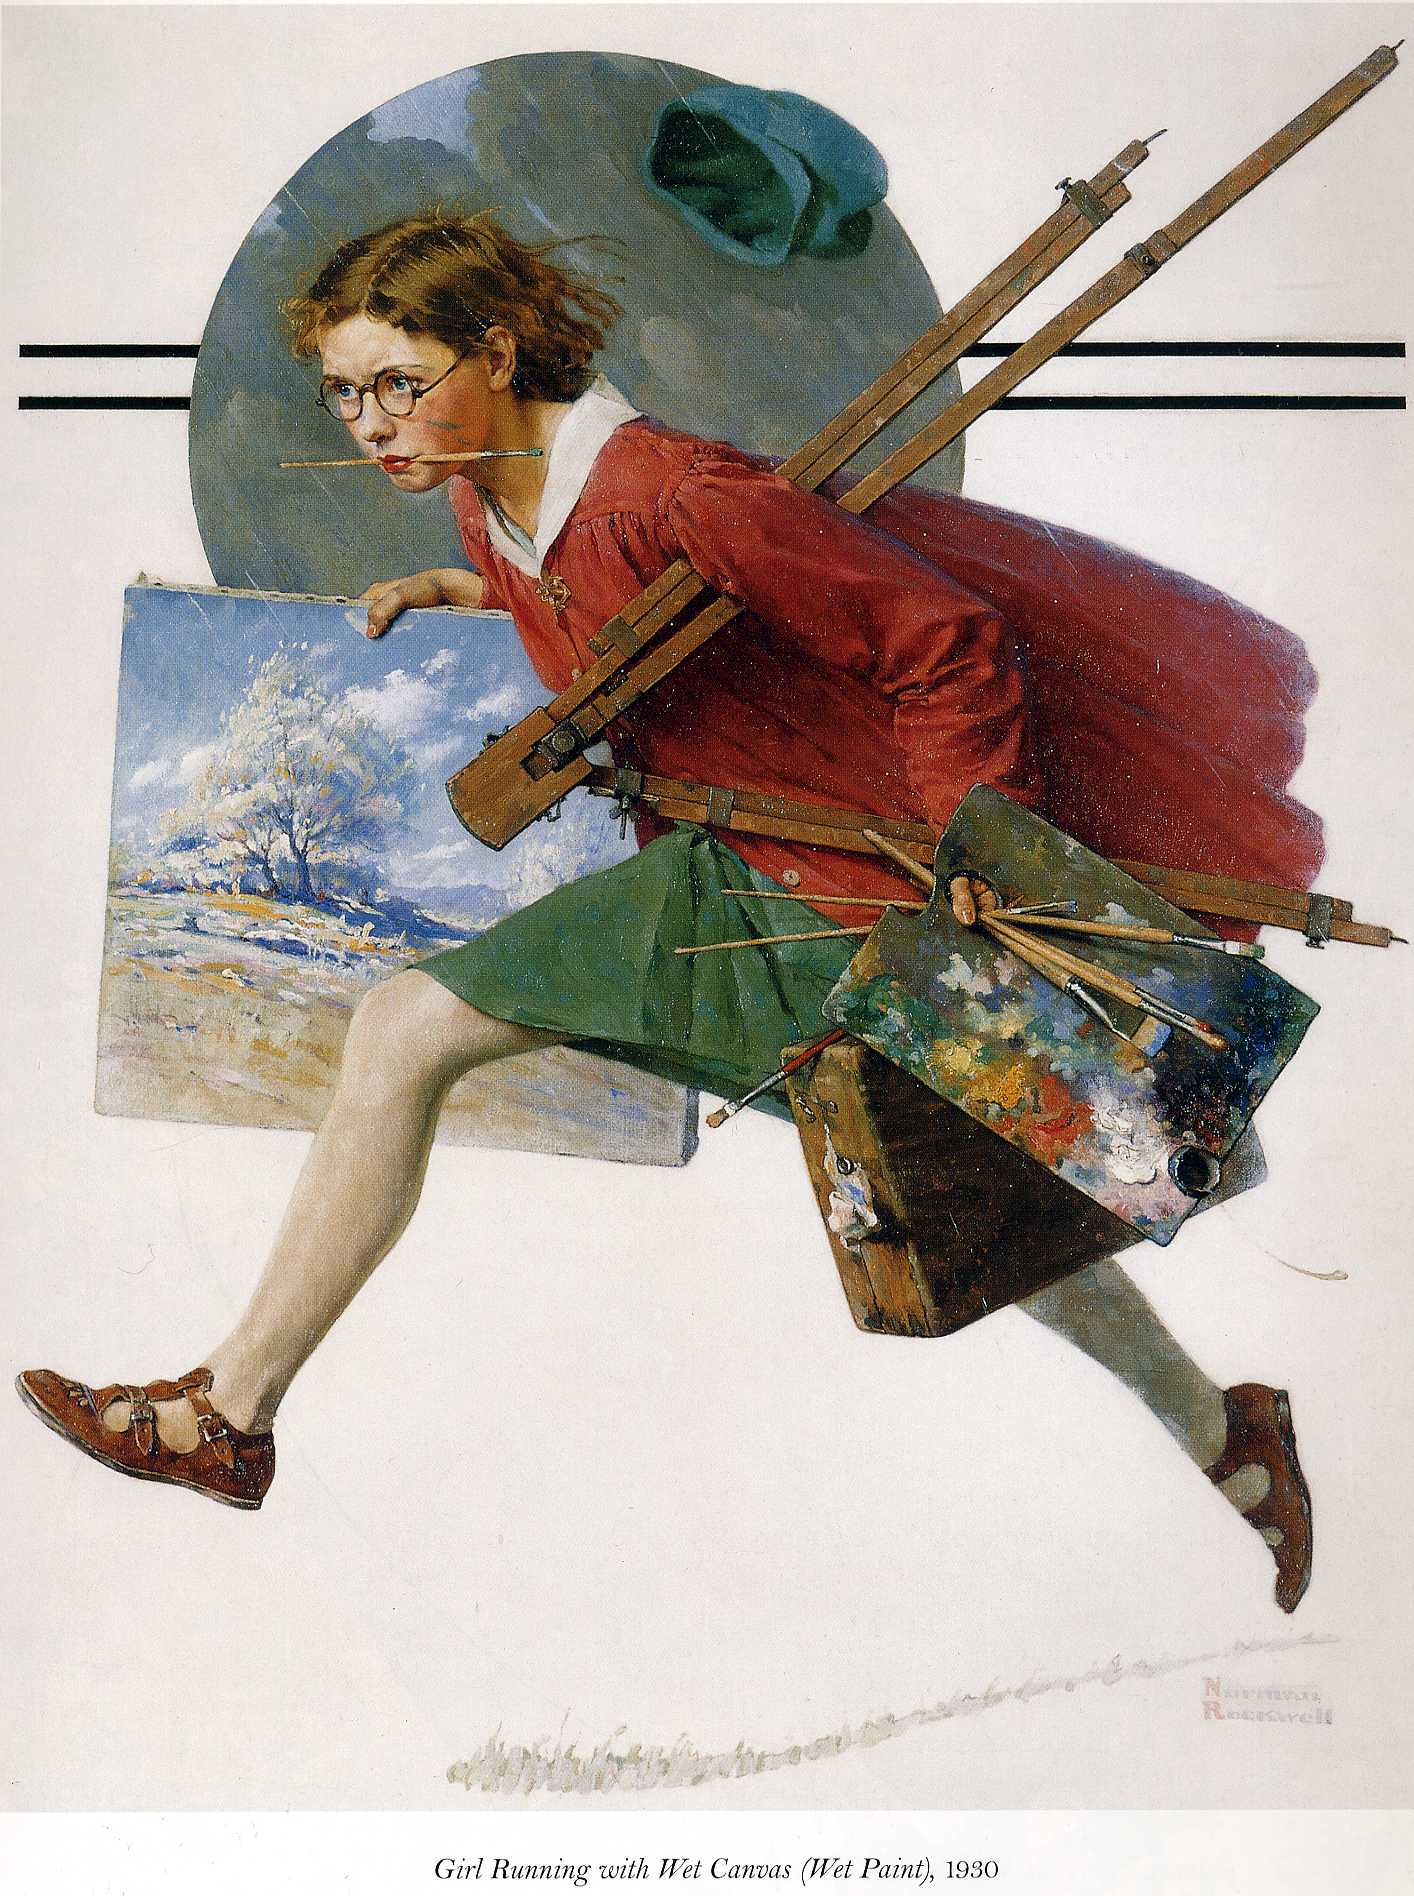 Beyond Objectification Norman Rockwells Depictions of Women for the Saturday Evening Post - Norman Rockwell Museum pic